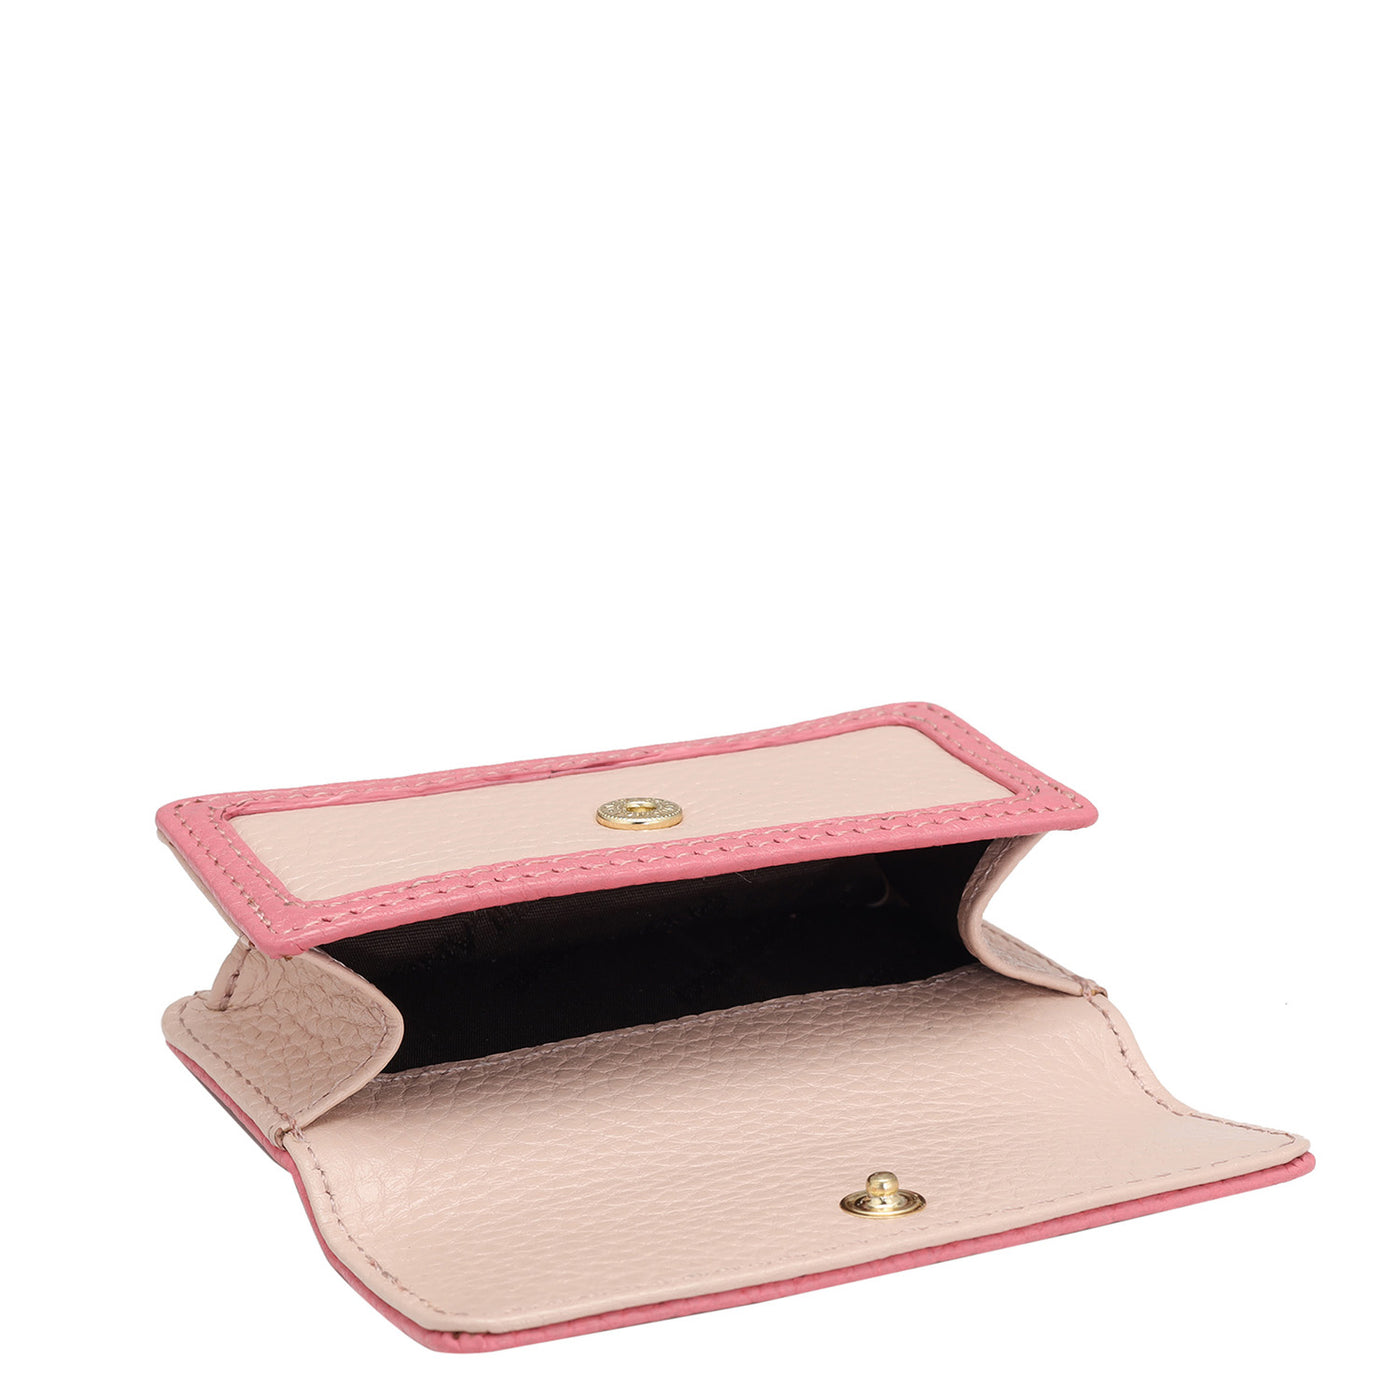 Wax Leather Lipstick Case - Baby Pink